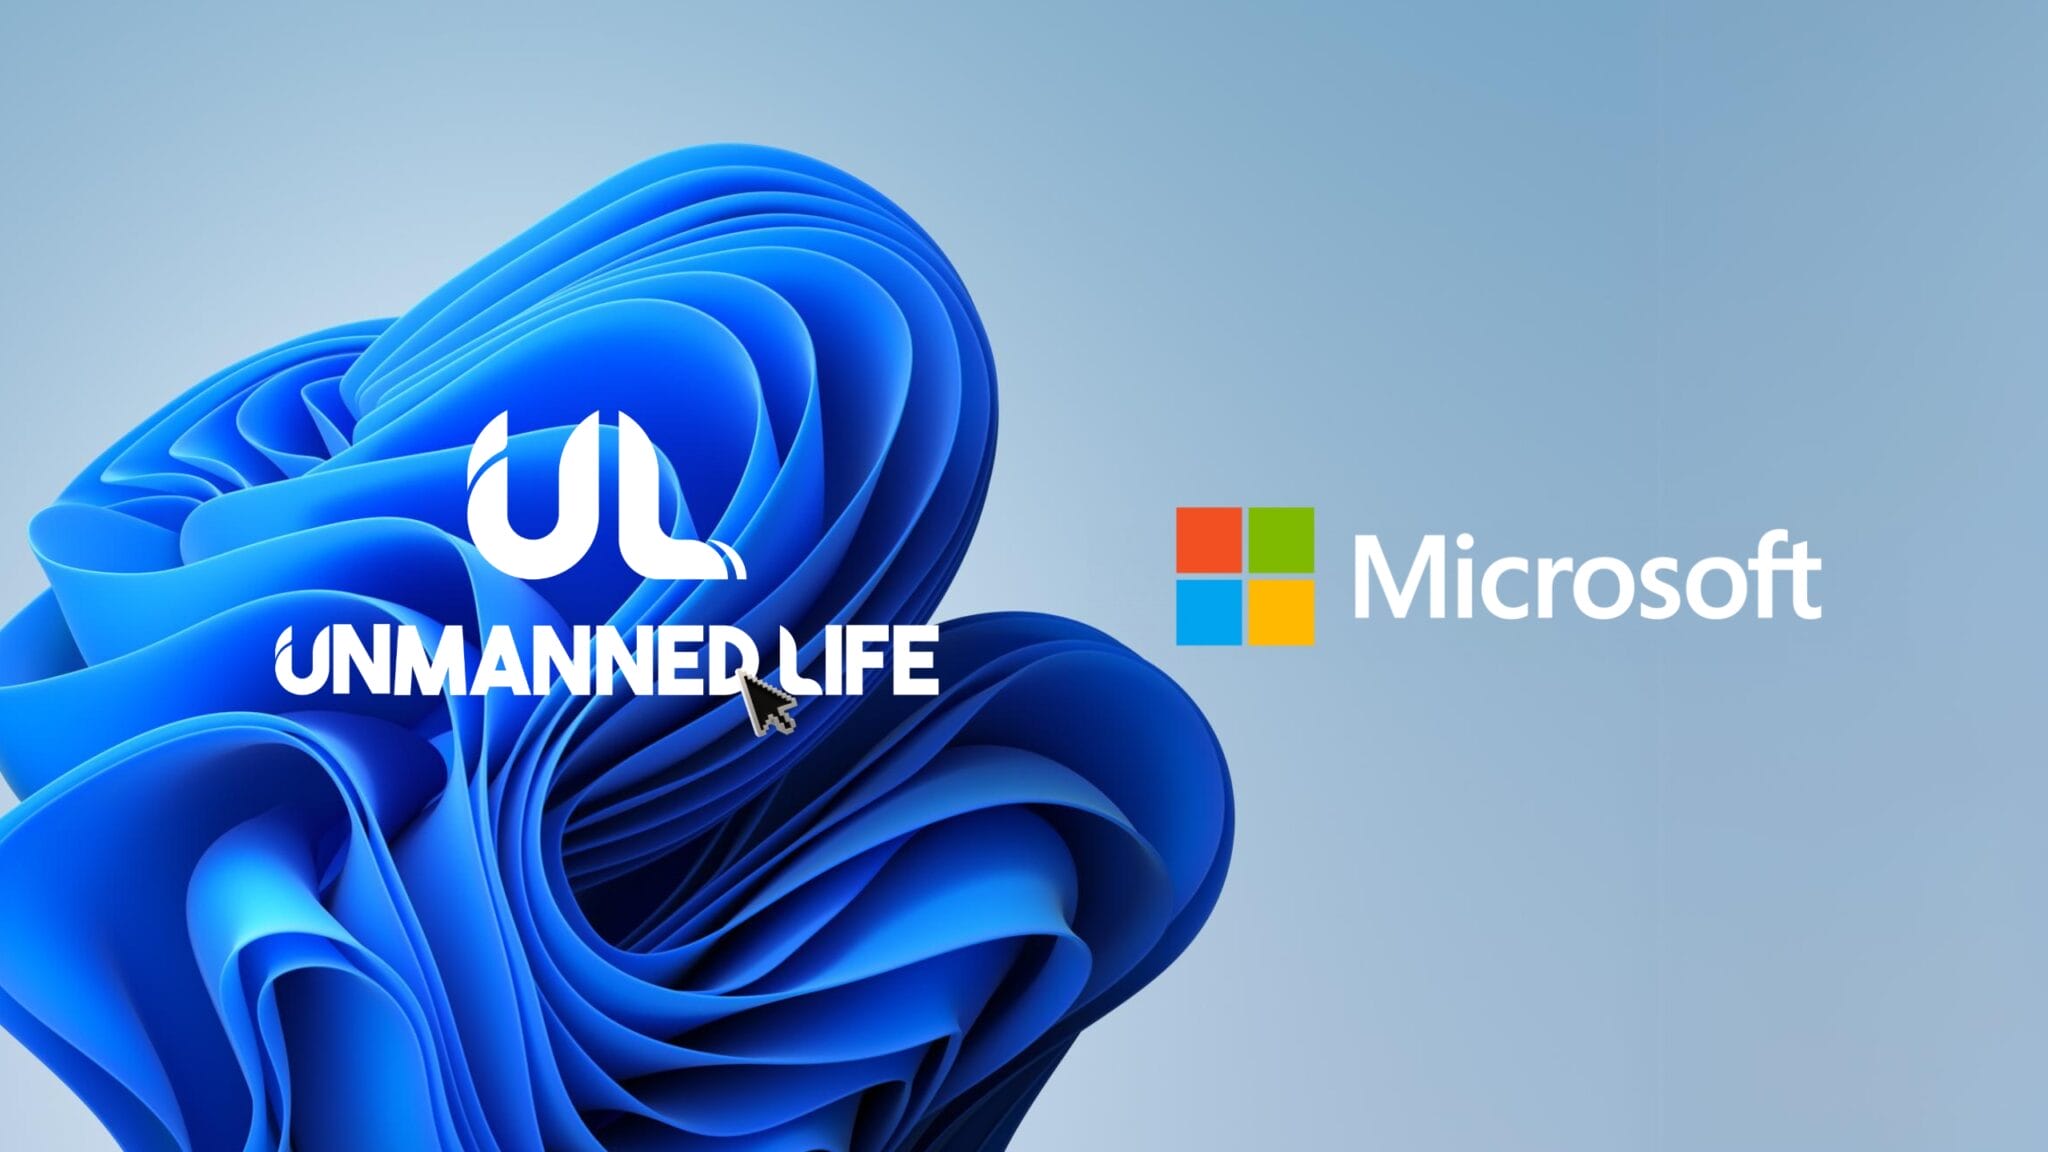 UNMANNED LIFE’S INTEGRATION WITH MICROSOFT AZURE PRIVATE MEC